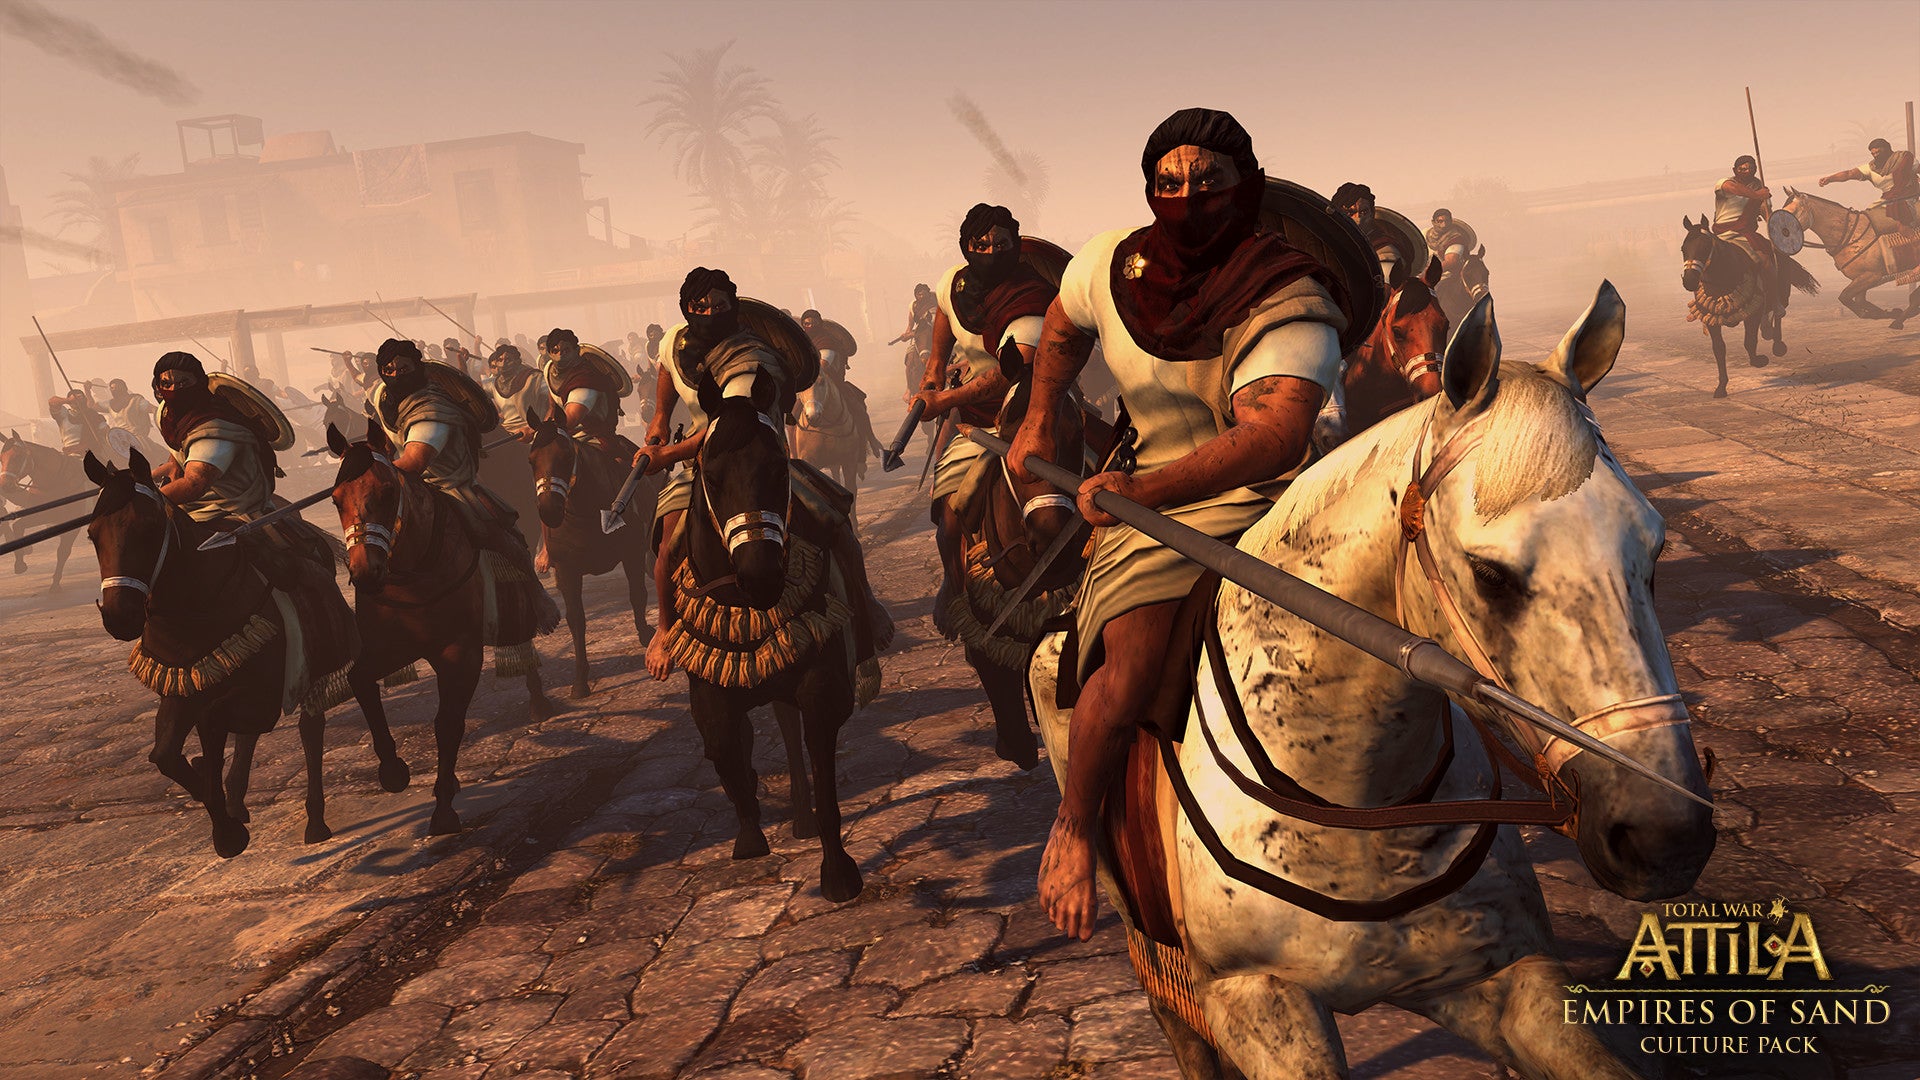 Image for Empires of Sand Culture Pack out next week for Total War: Attila